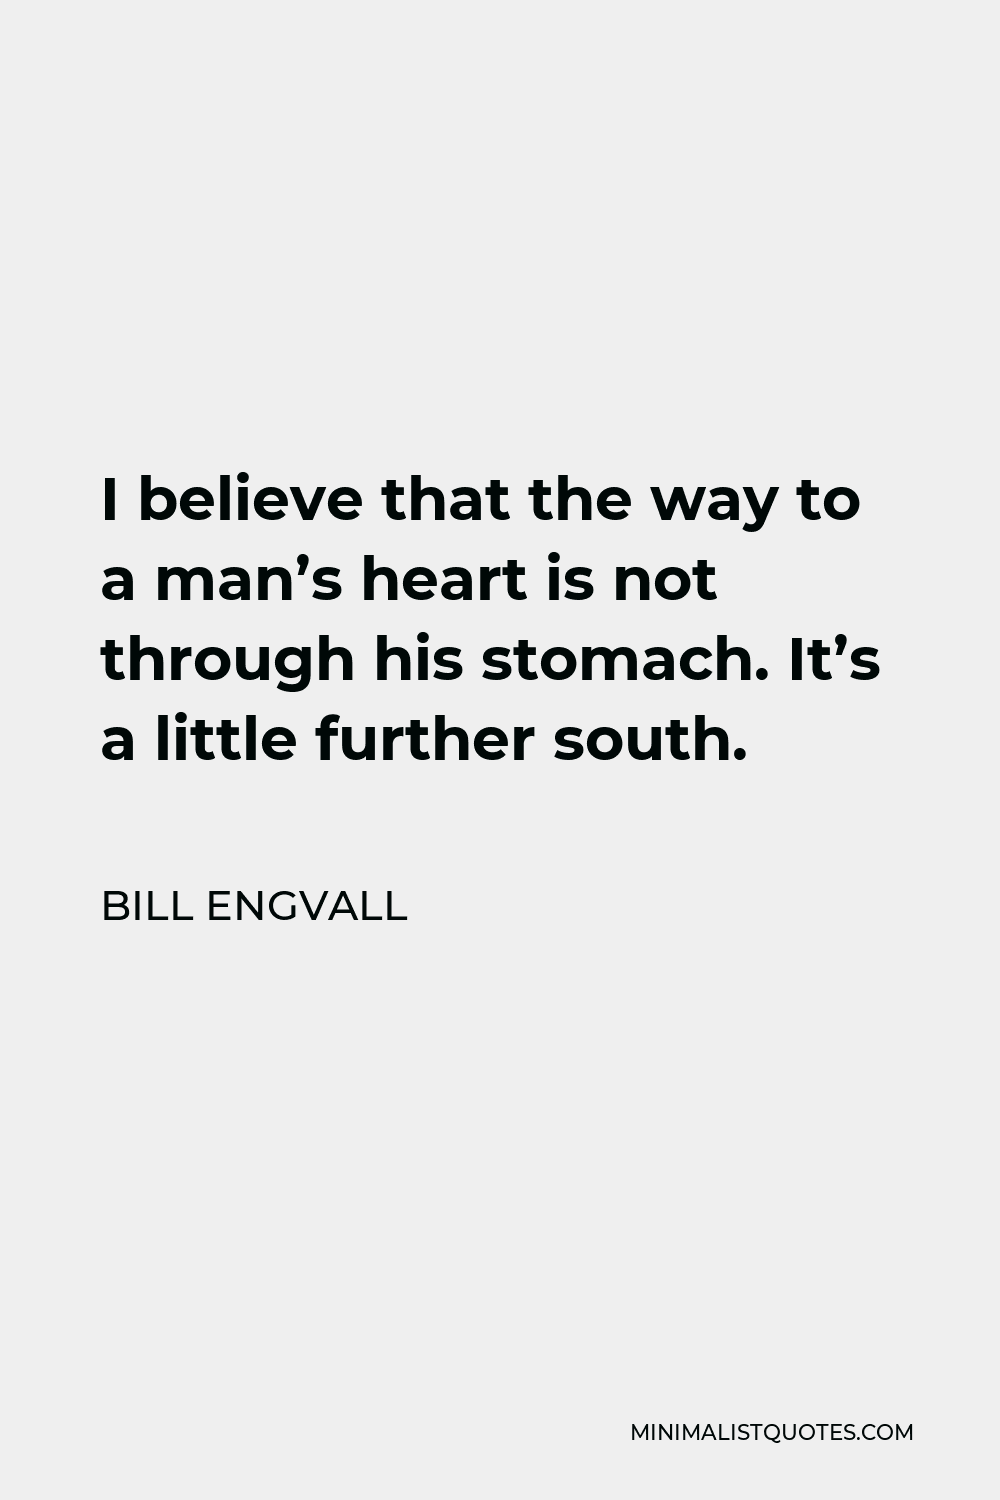 Bill Engvall Quote - I believe that the way to a man’s heart is not through his stomach. It’s a little further south.